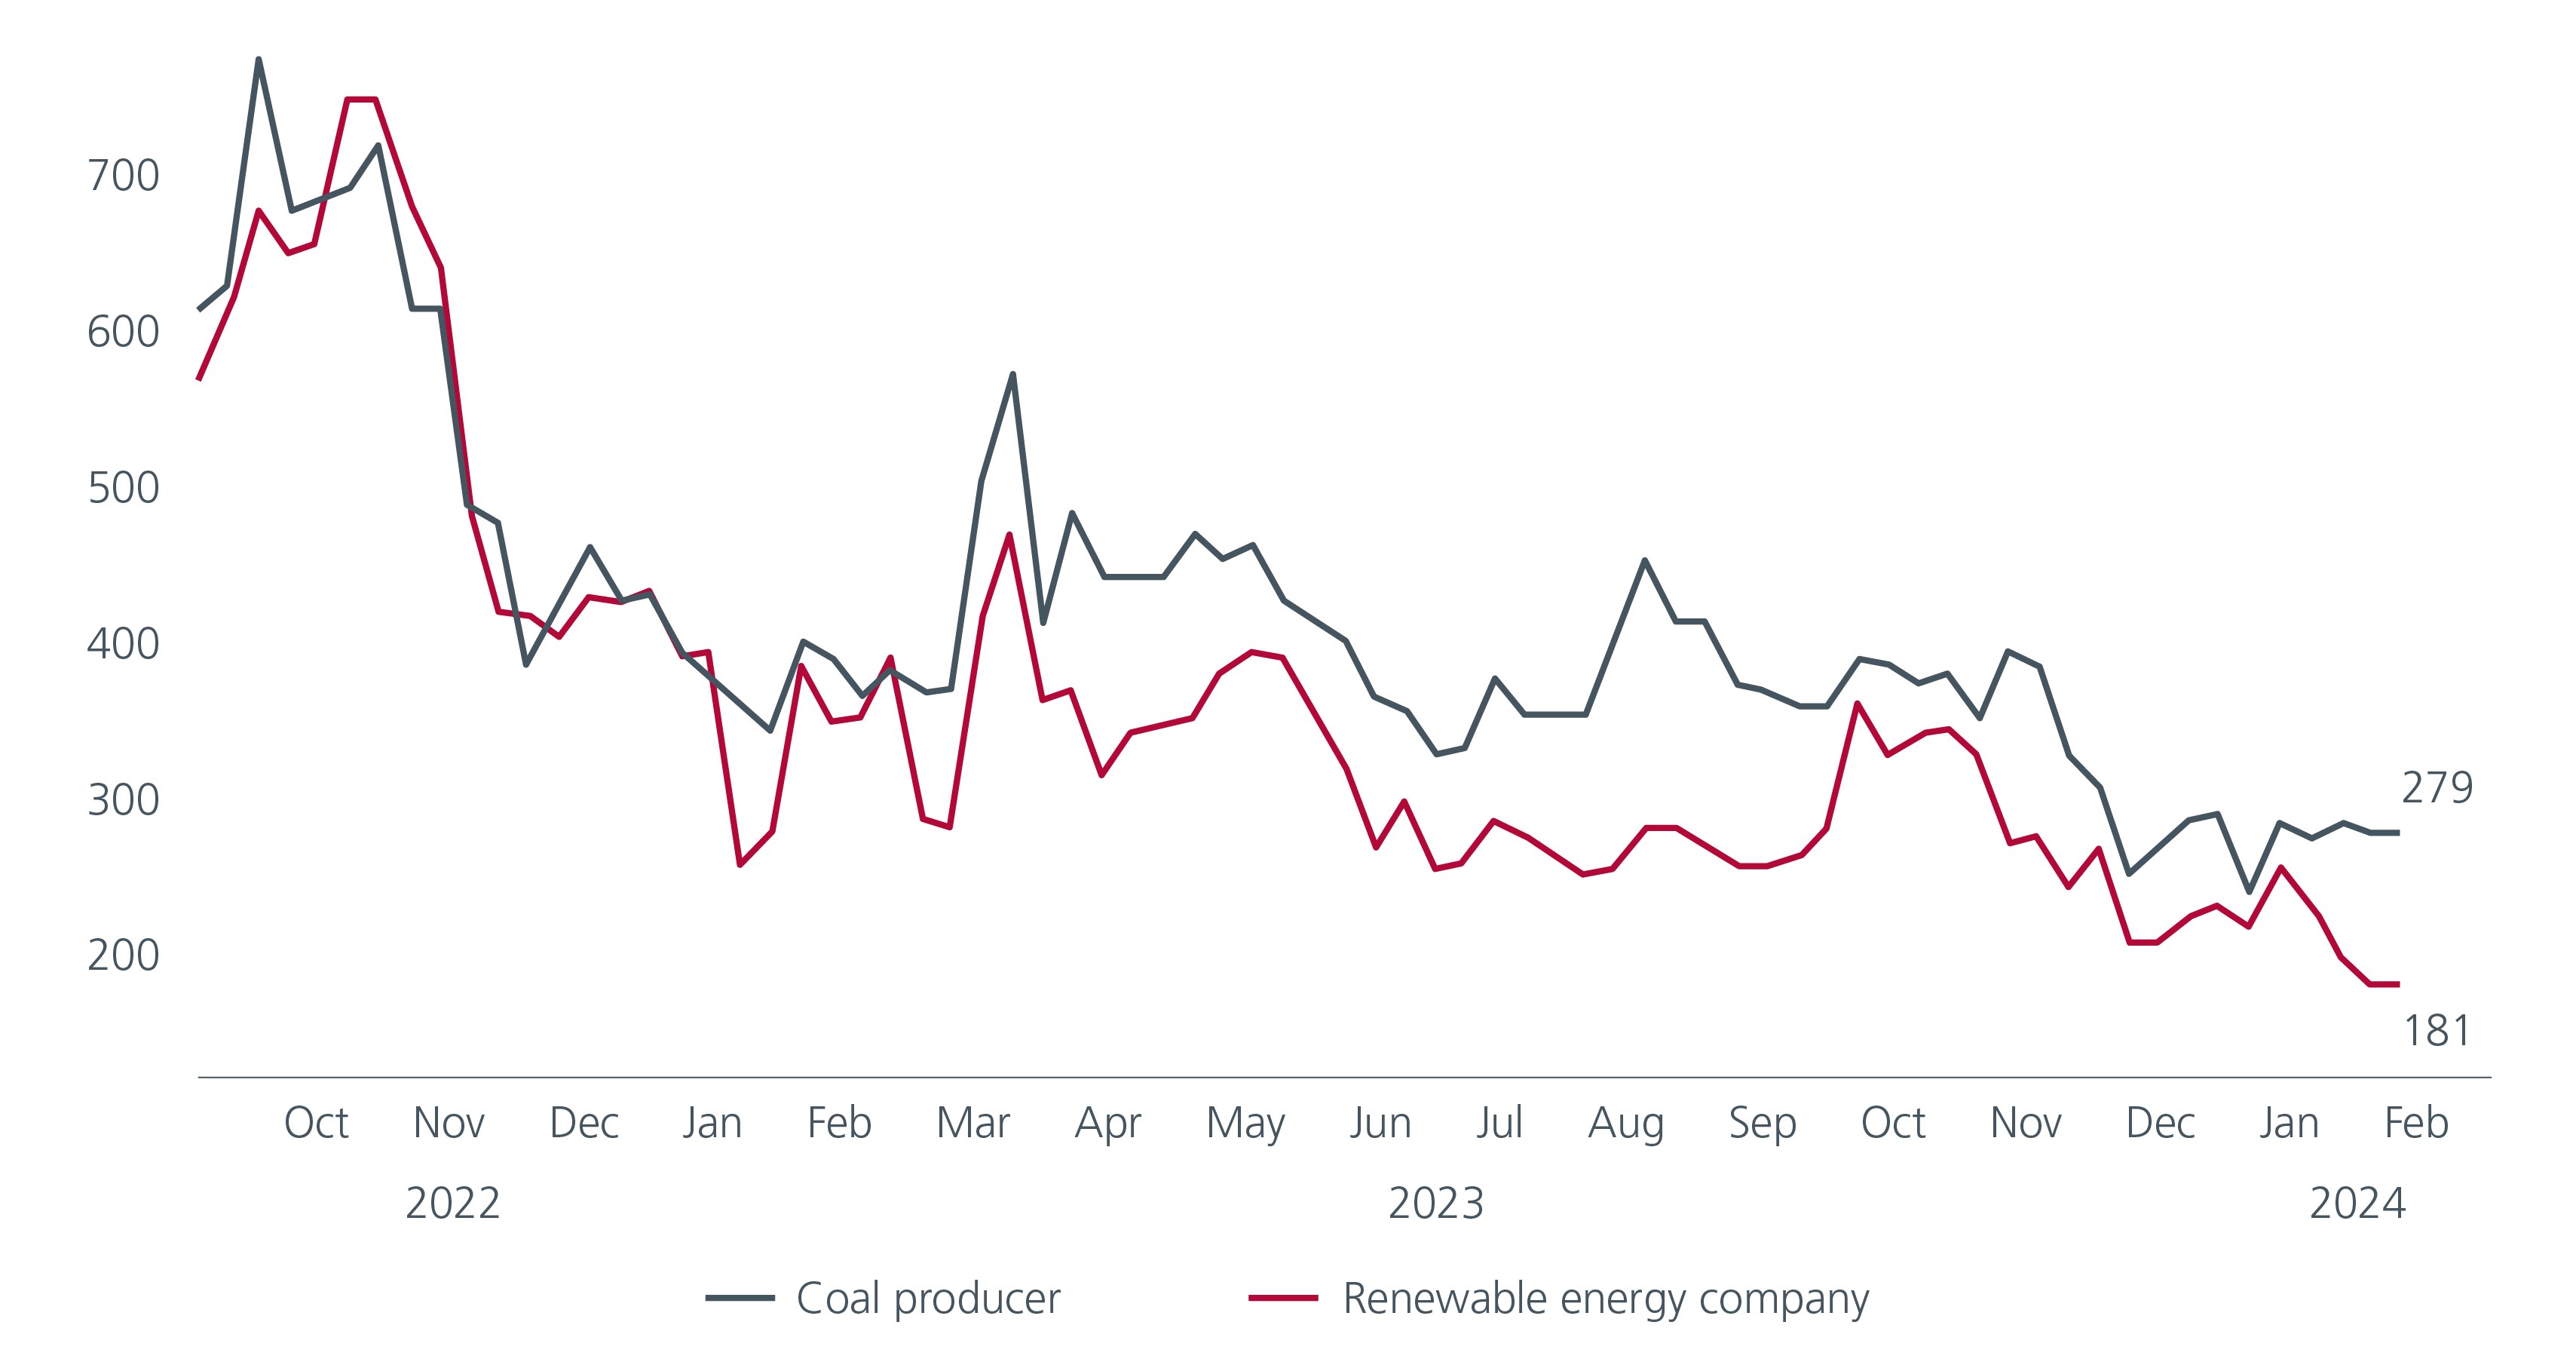 Fig. 1. Comparison of spreads – coal producer versus renewable energy company (basis points